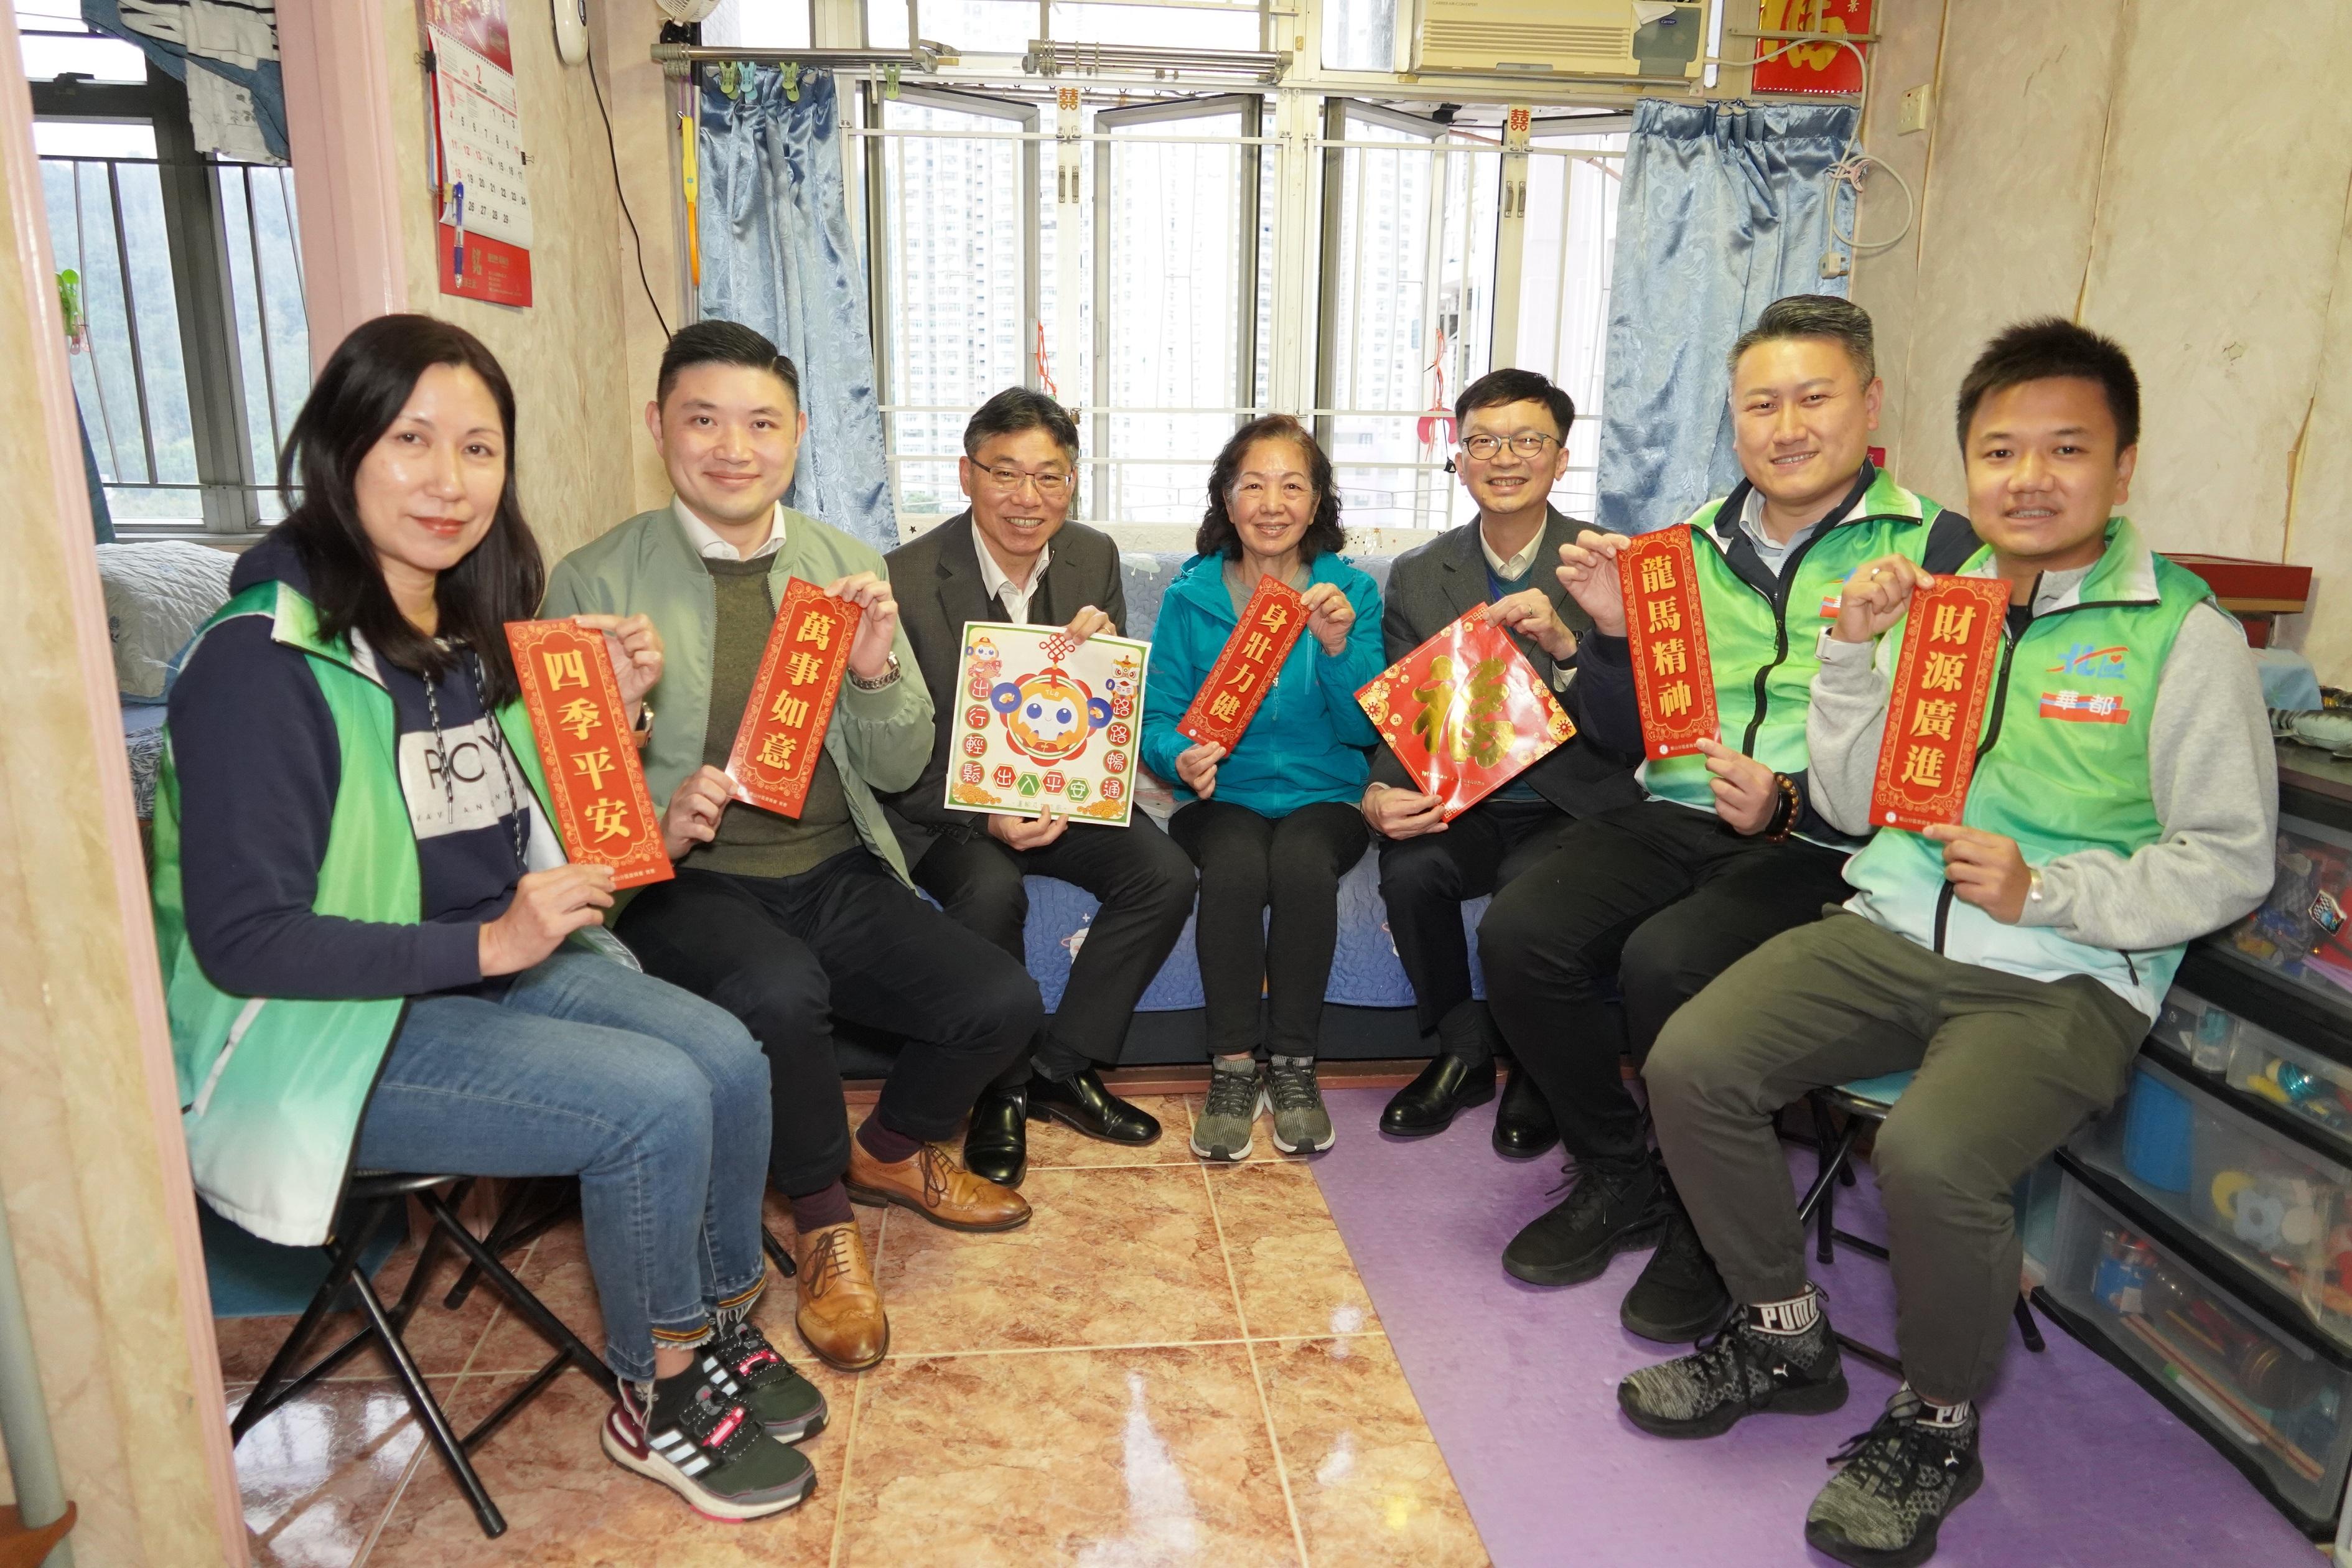 The Secretary for Transport and Logistics, Mr Lam Sai-hung (third left), and the Under Secretary for Transport and Logistics, Mr Liu Chun-san (third right), accompanied by the District Officer (North), Mr Derek Lai (second left), together with a North District Council member and representatives from the Care Team (North), visit an elderly living at Wah Sum Estate in Fanling today (February 7).